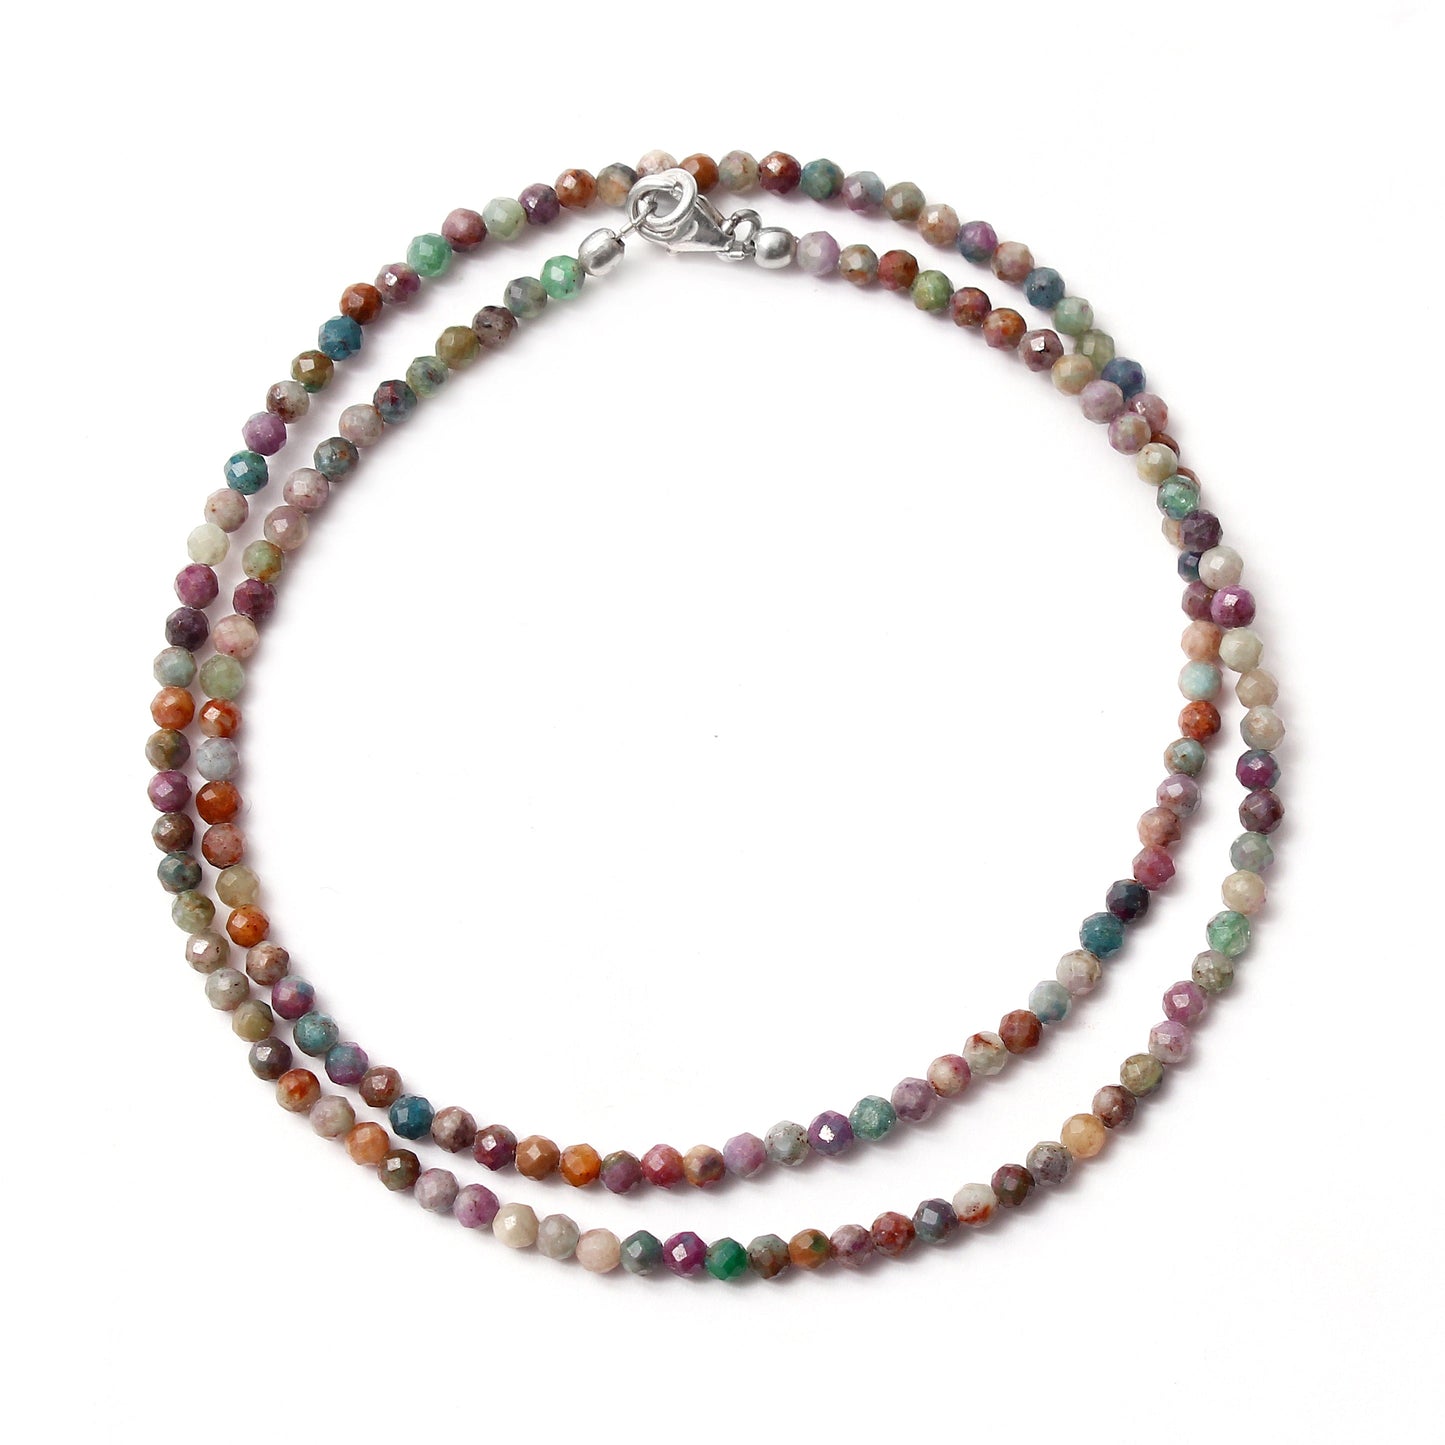 Natural Multi Tourmaline Beaded Necklace, Micro Faceted Round Necklace Gift For Women. GemsRush